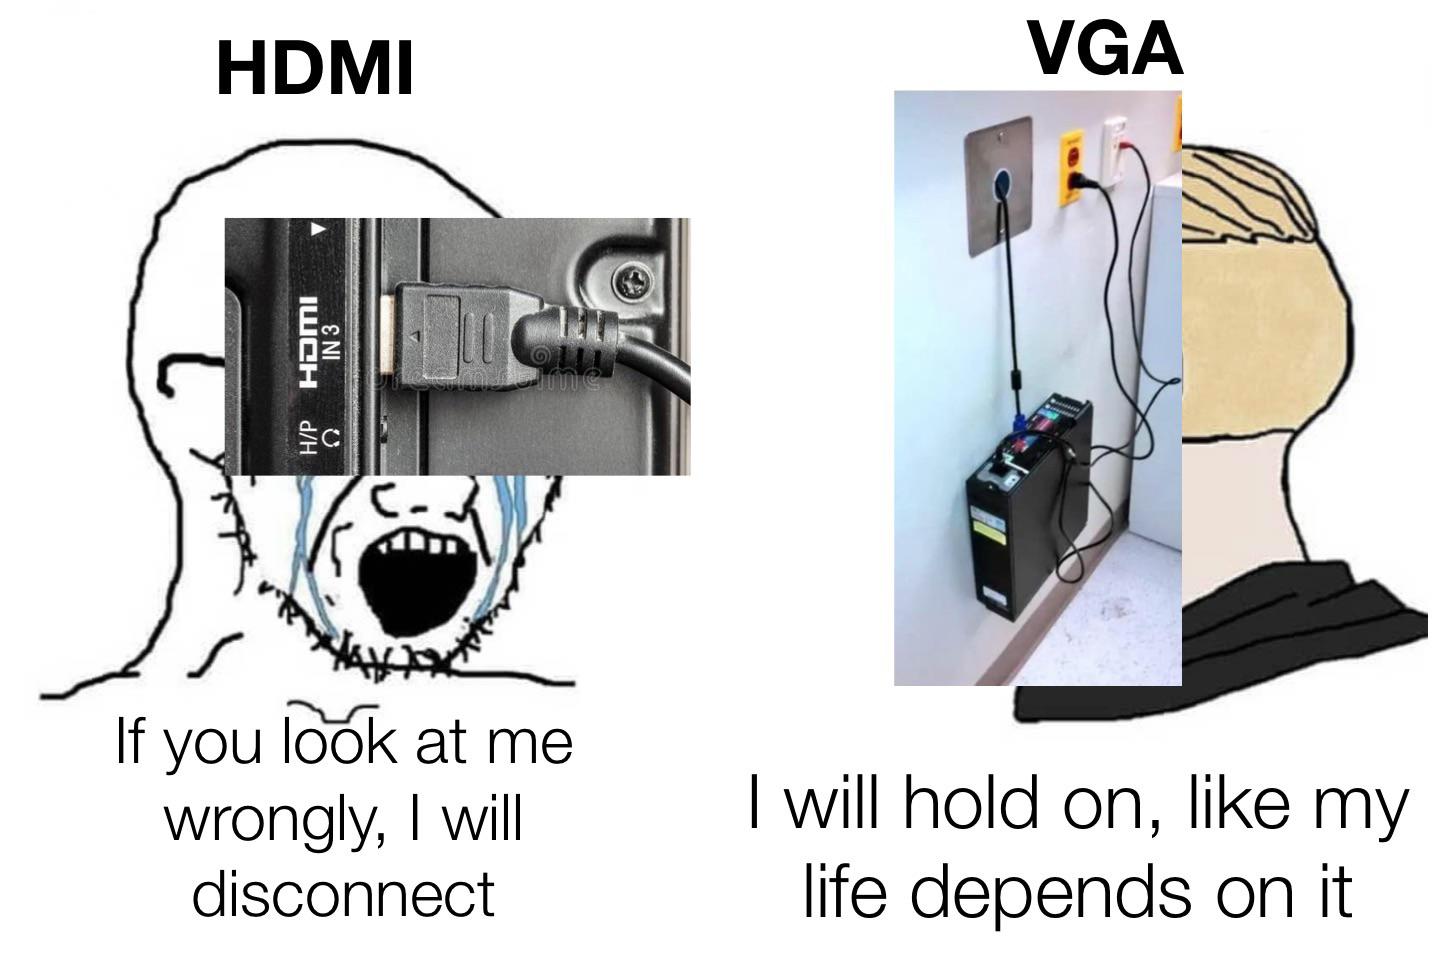 Disconnect the VGA cable from the current computer.
Connect the monitor to a different computer using the same VGA cable.